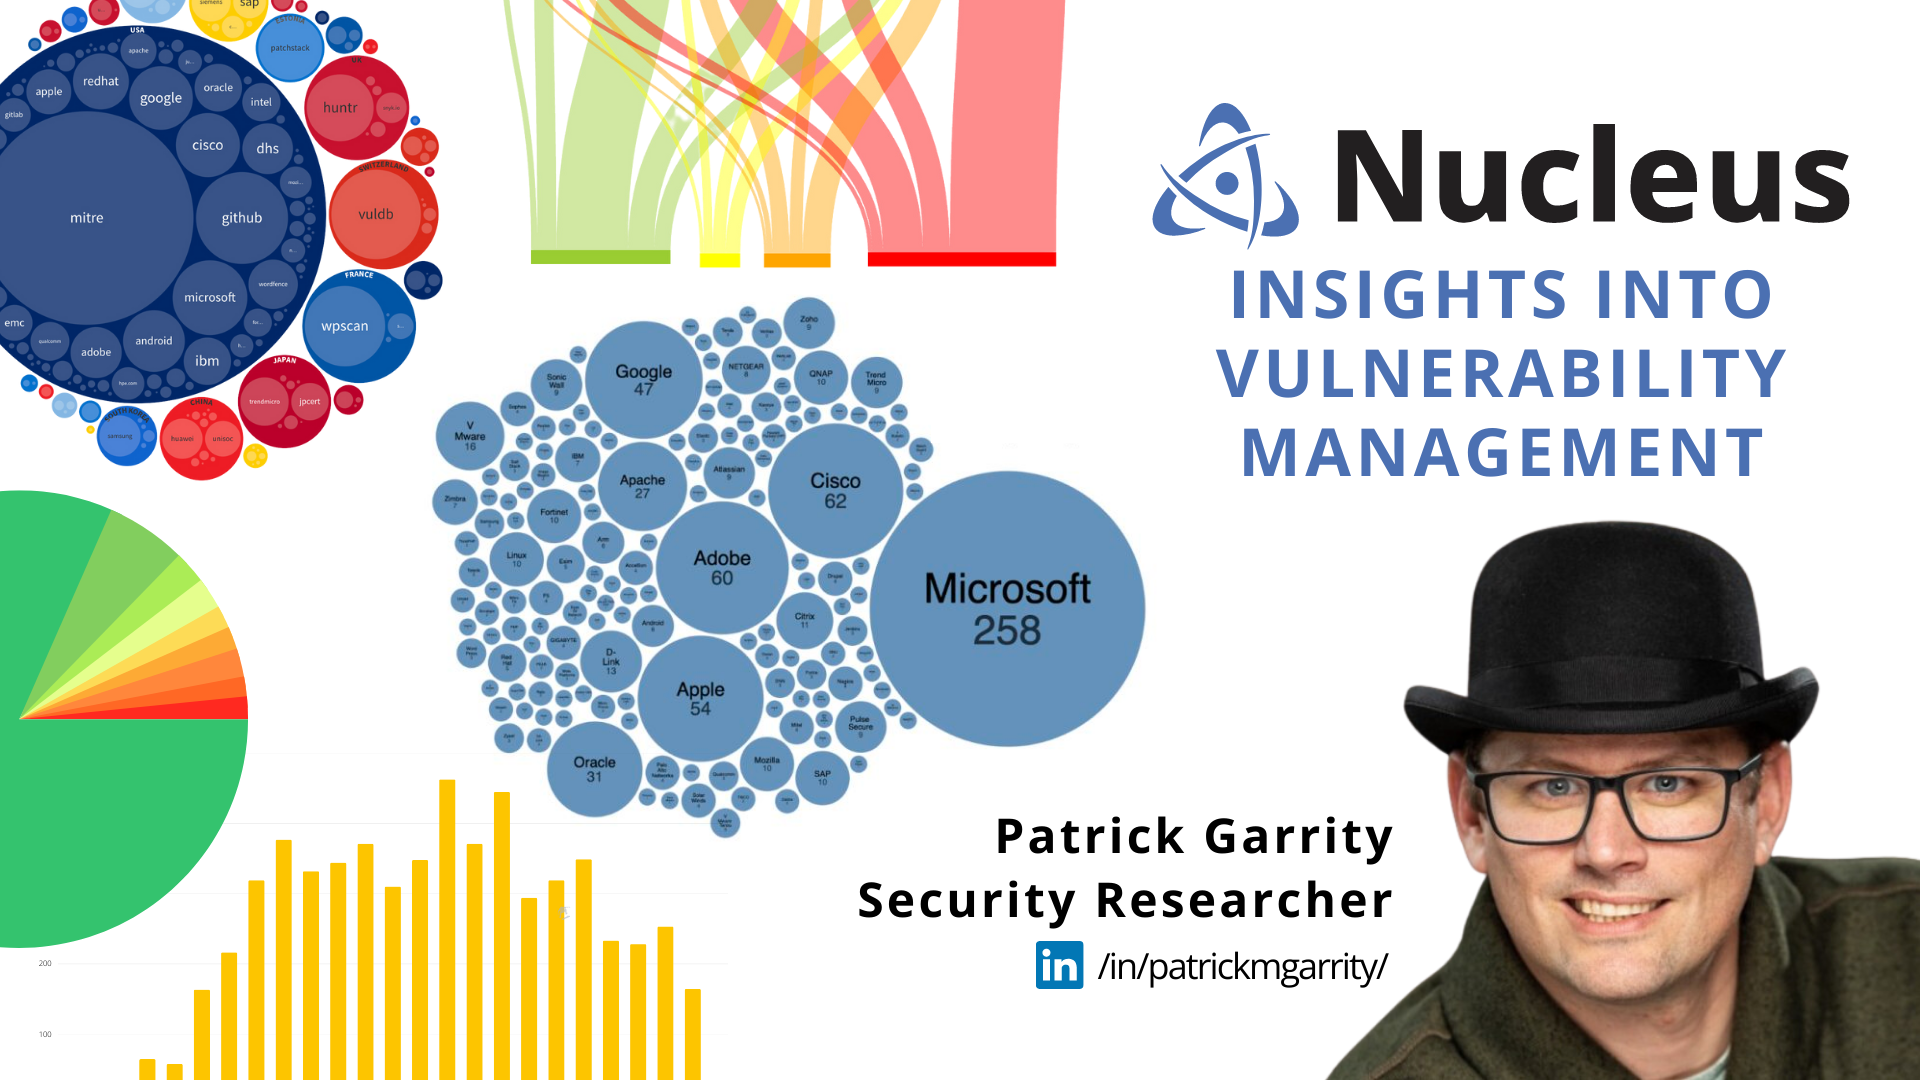 Patrick Garrity's Insights Into Vulnerability Management